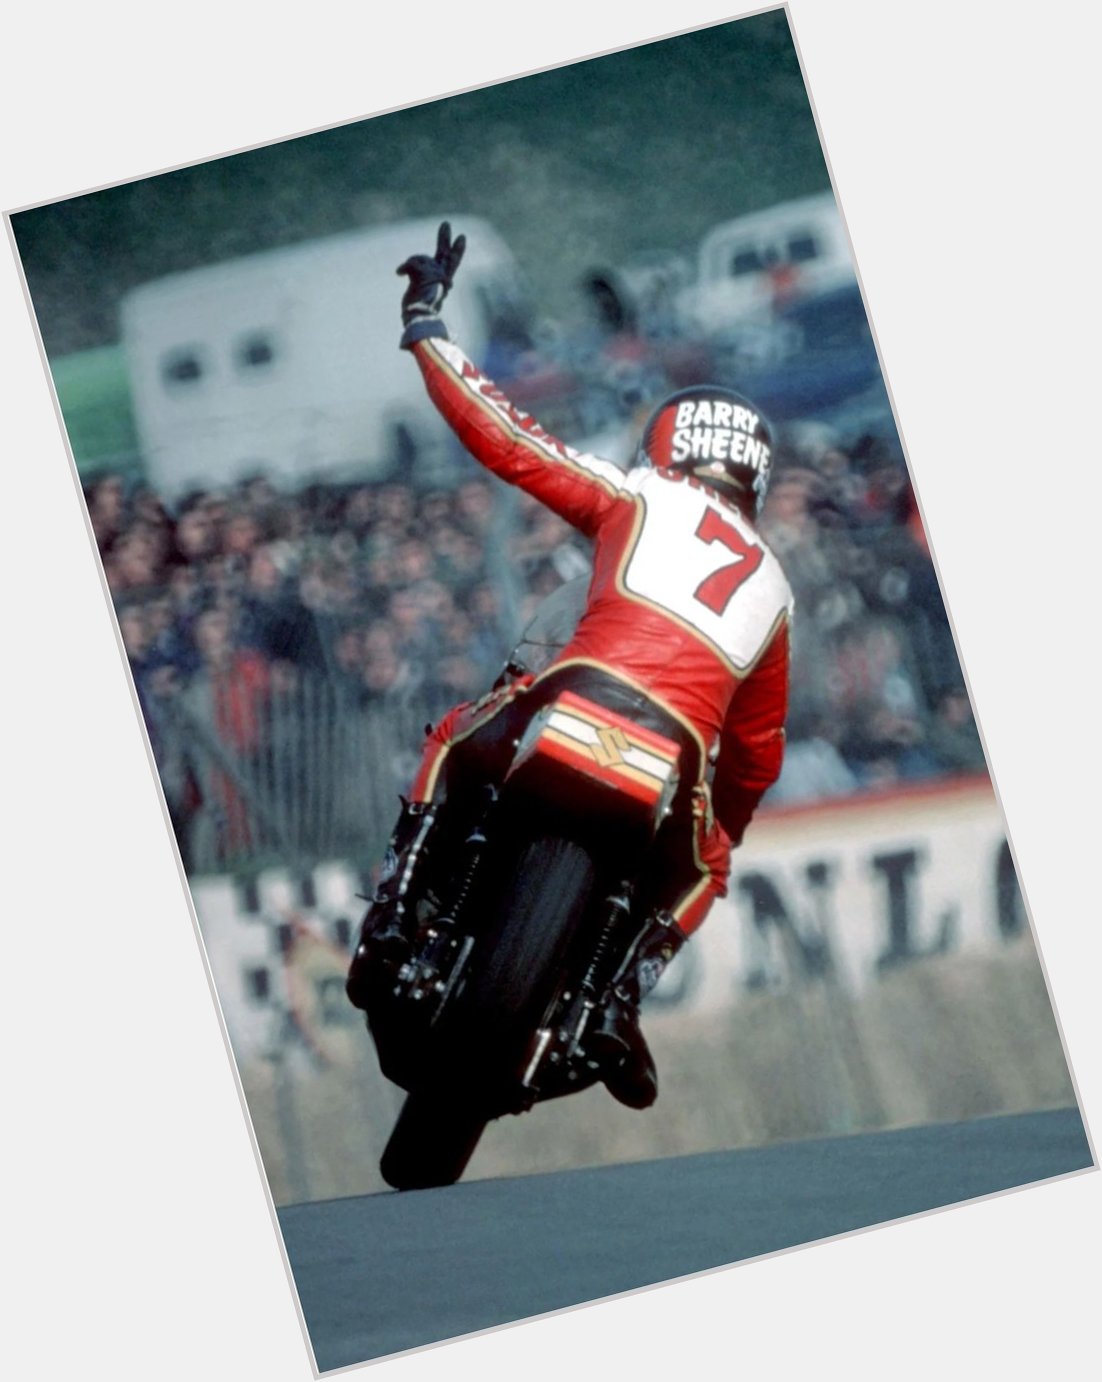 Today would be Bazza\s 70th. Happy birthday Barry Sheene 